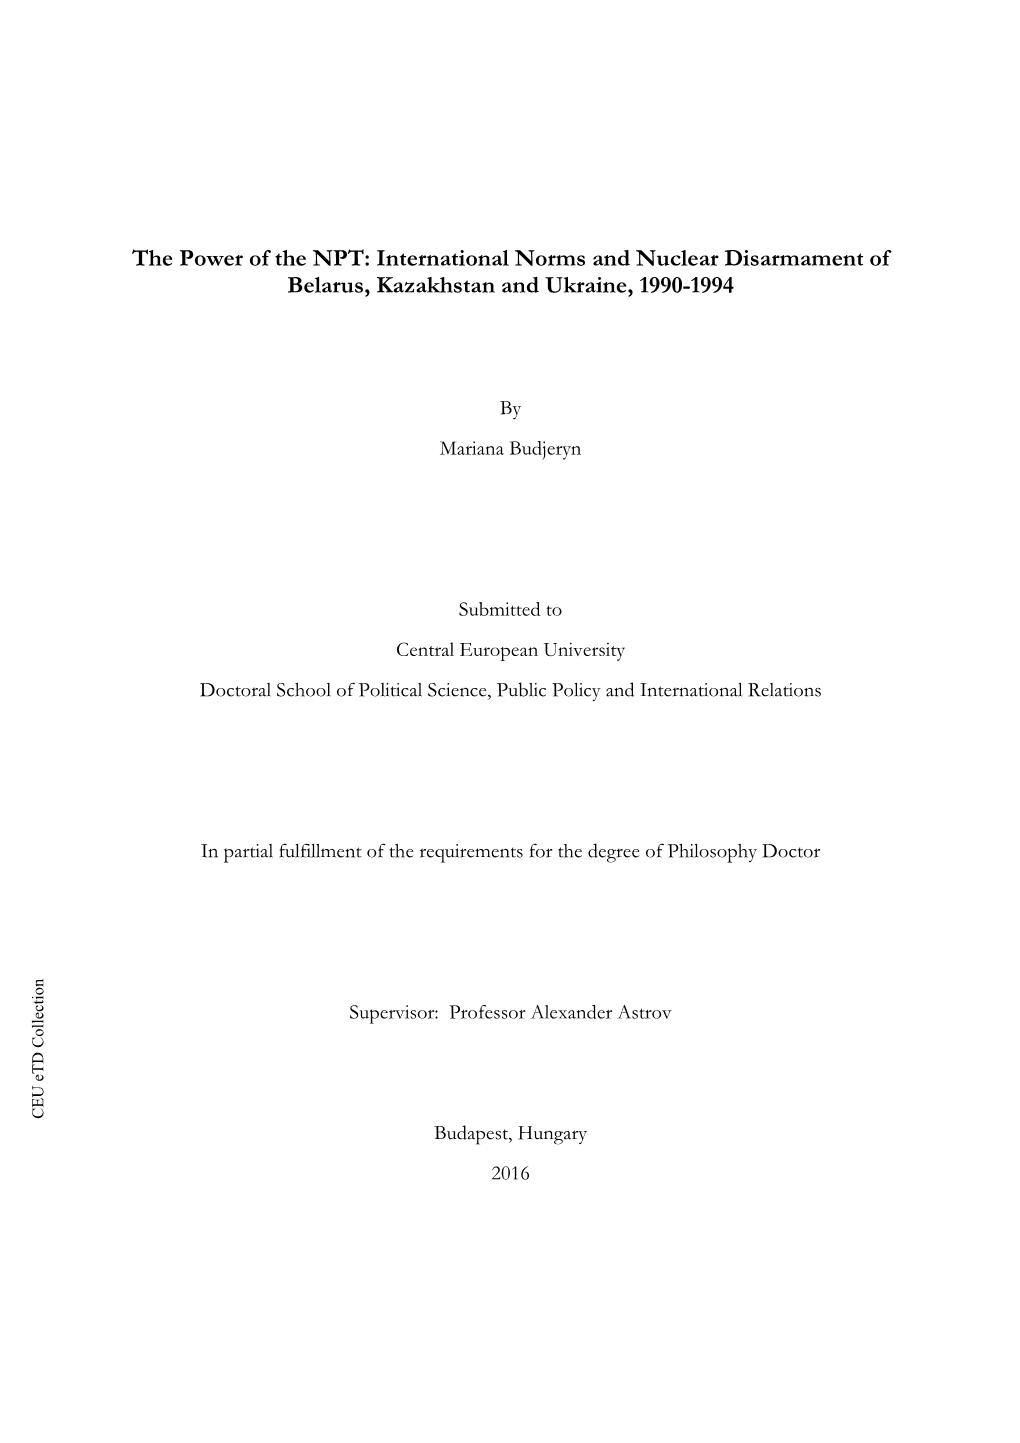 The Power of the NPT: International Norms and Nuclear Disarmament of Belarus, Kazakhstan and Ukraine, 1990-1994